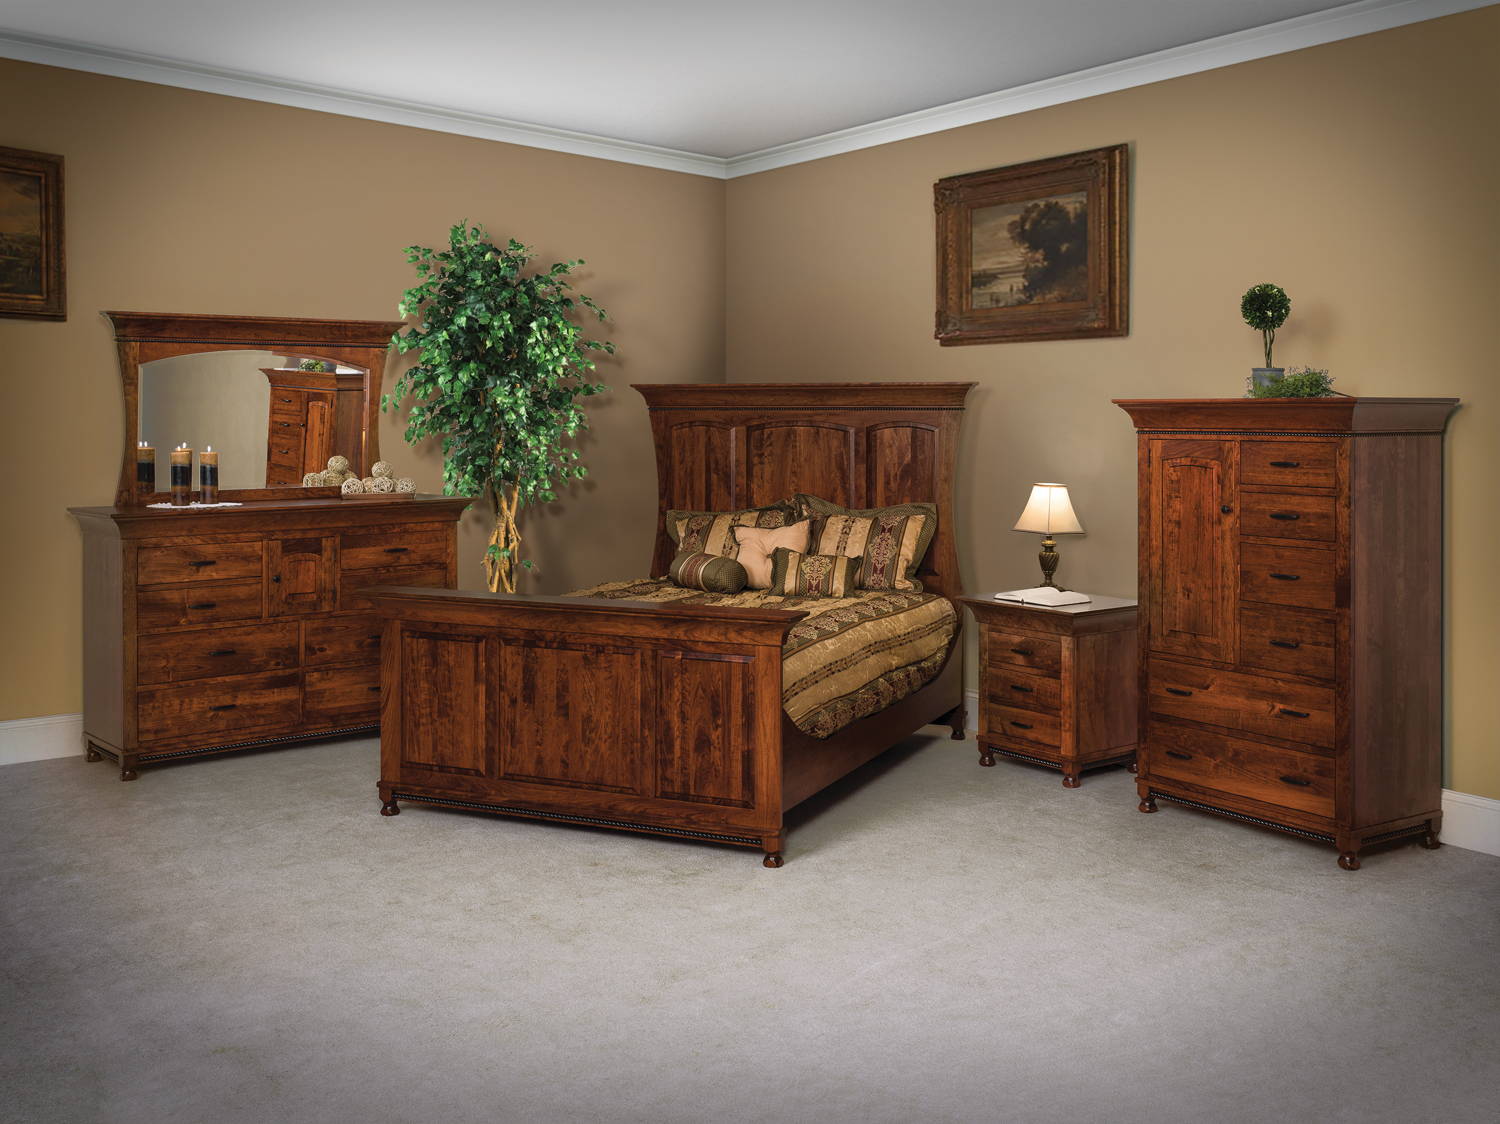 Image of fully customizable Henry Stephens Bedroom Set through Harvest Home Interiors Amish Solid Wood Furniture